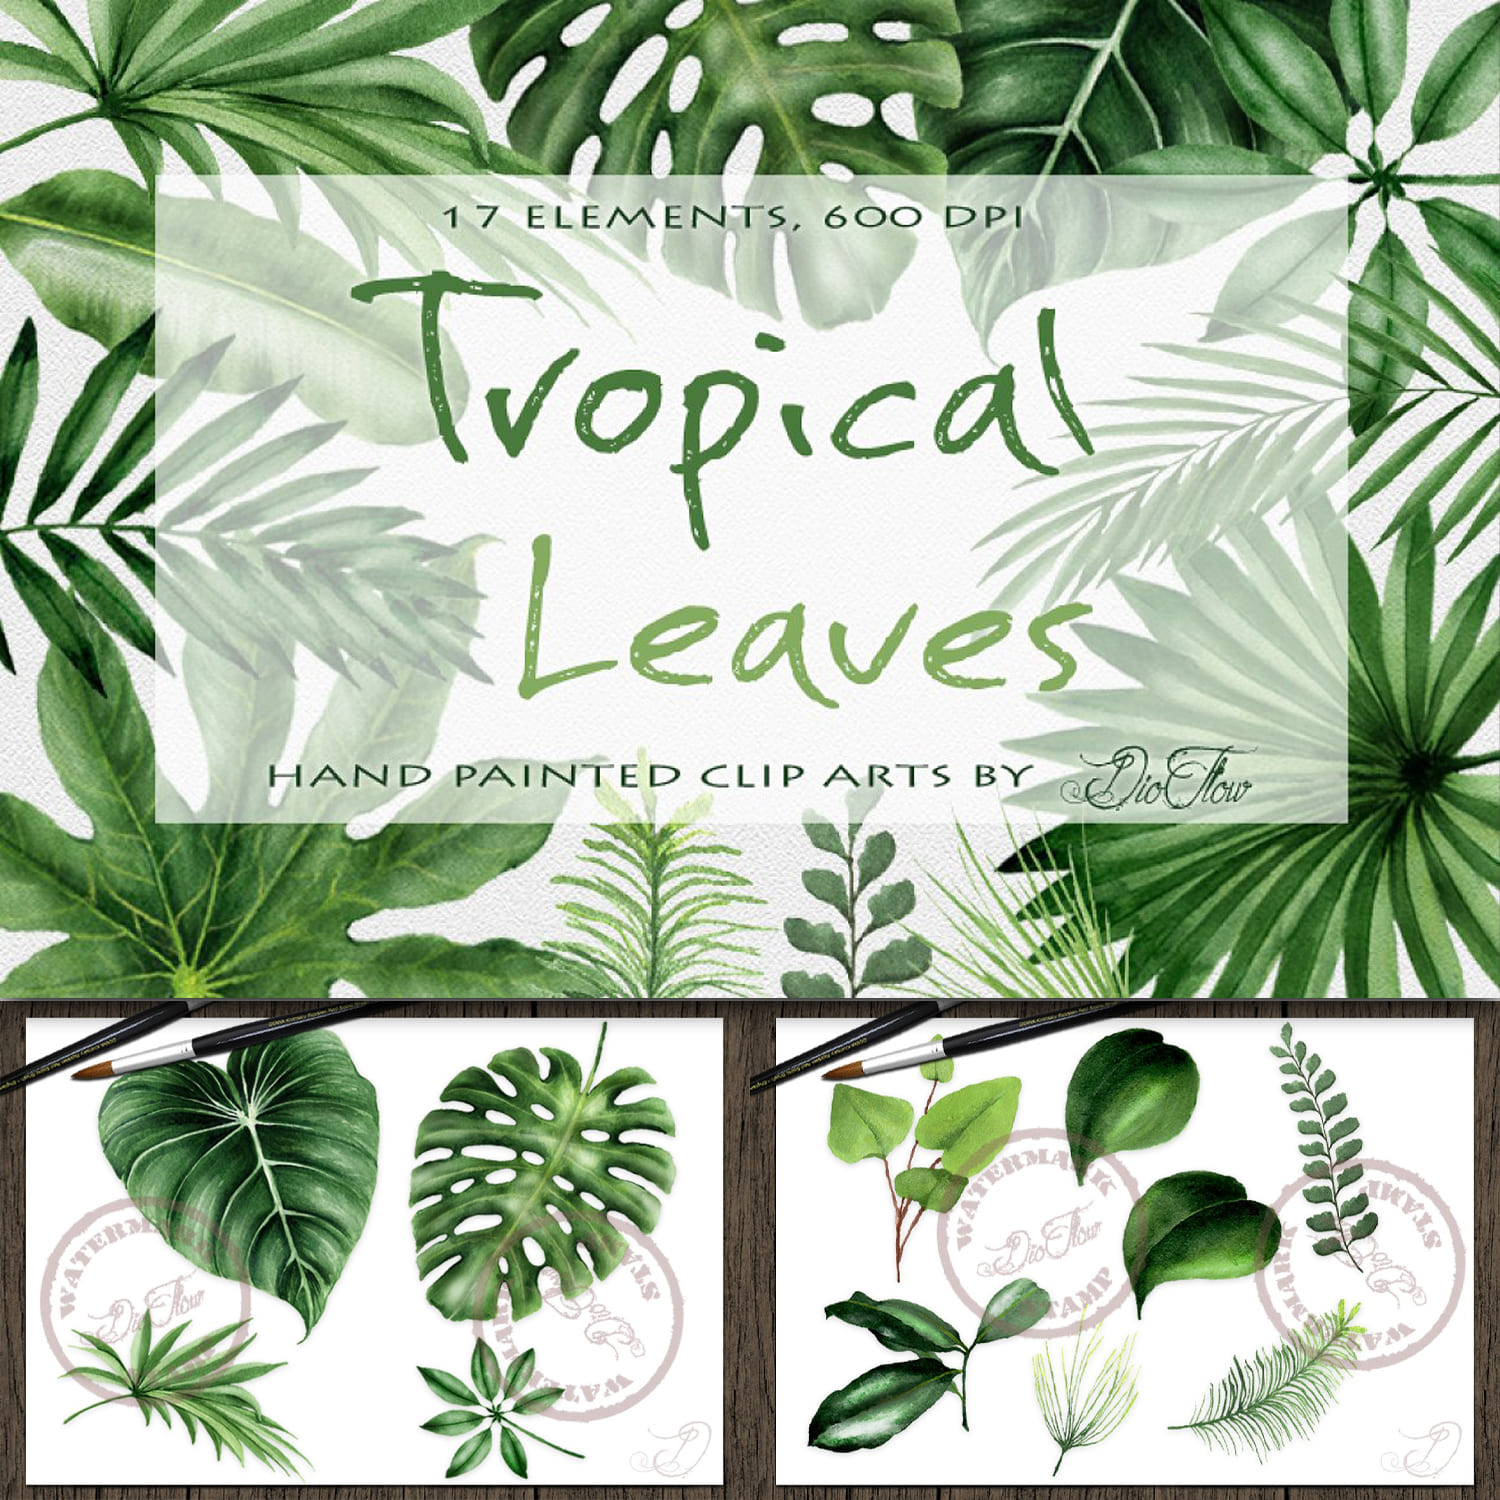 Tropical Leaves Watercolor Clip Art cover.